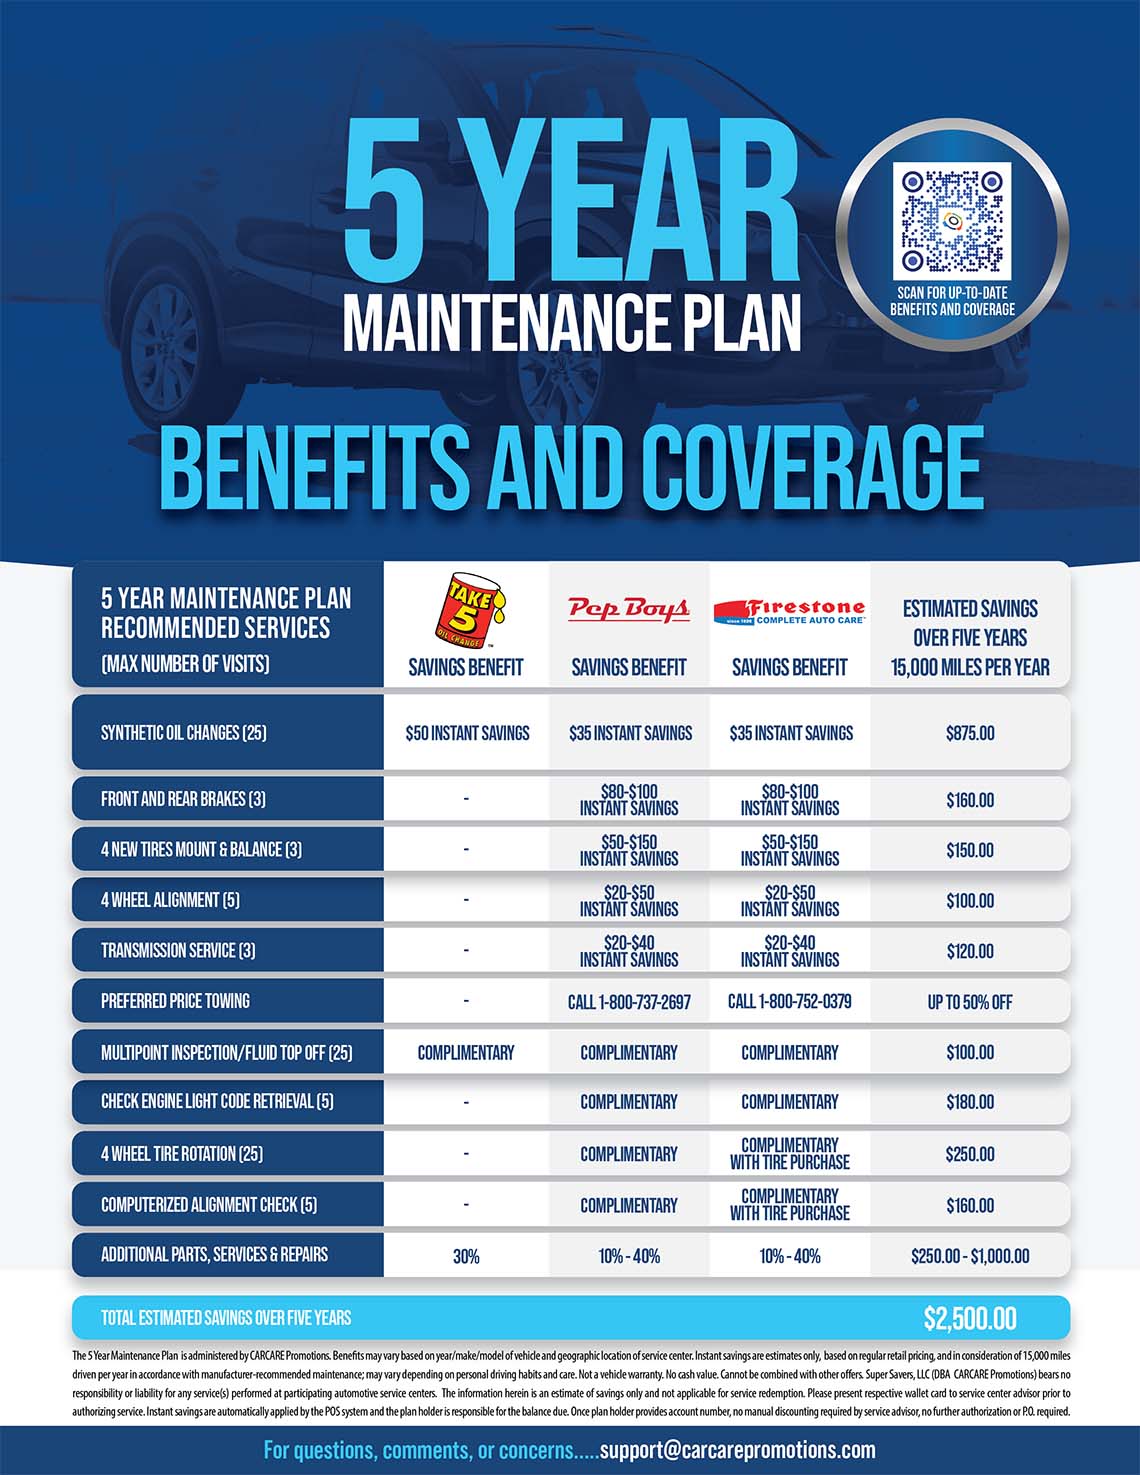 Benefits and coverage 5 Year Maintenance Plan